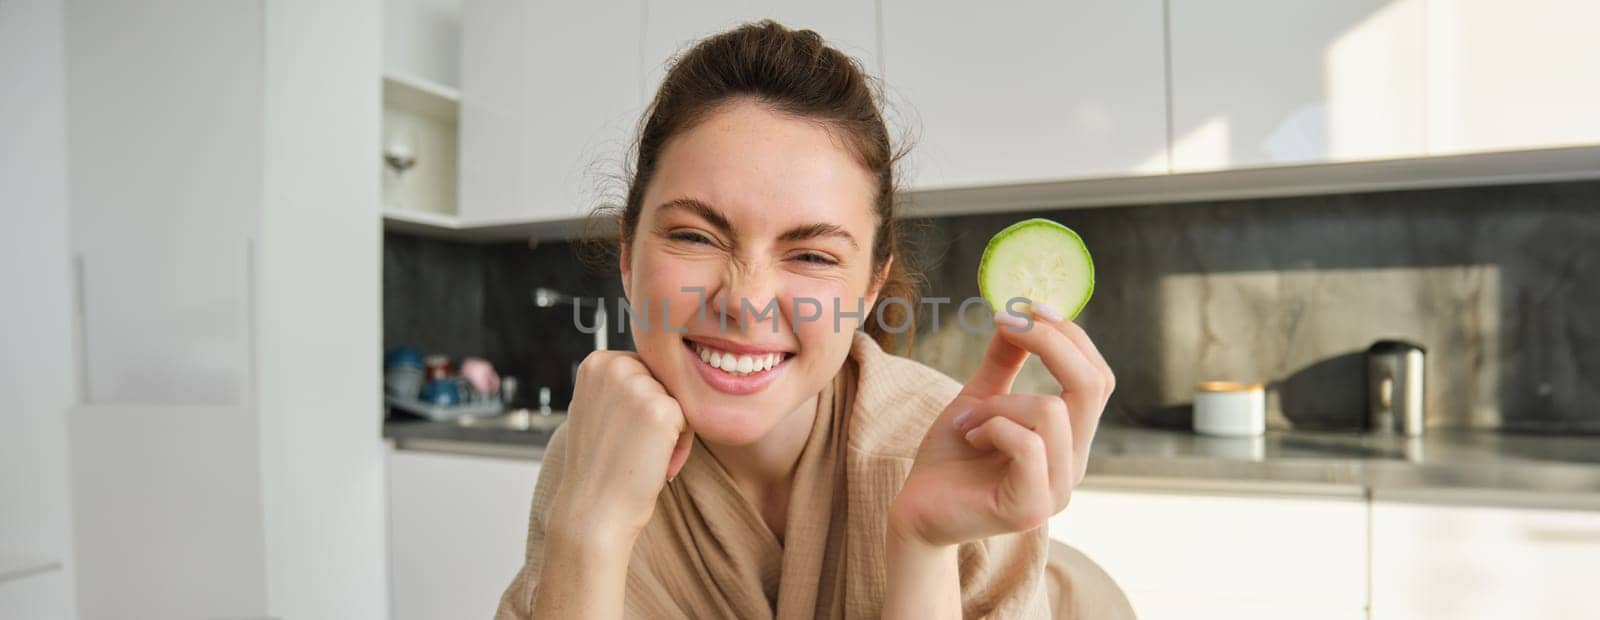 Portrait of beautiful brunette girl cooking in the kitchen, posing in bathrobe at home, holding zucchini, showing happy smile, making healthy food, vegetarian meal.